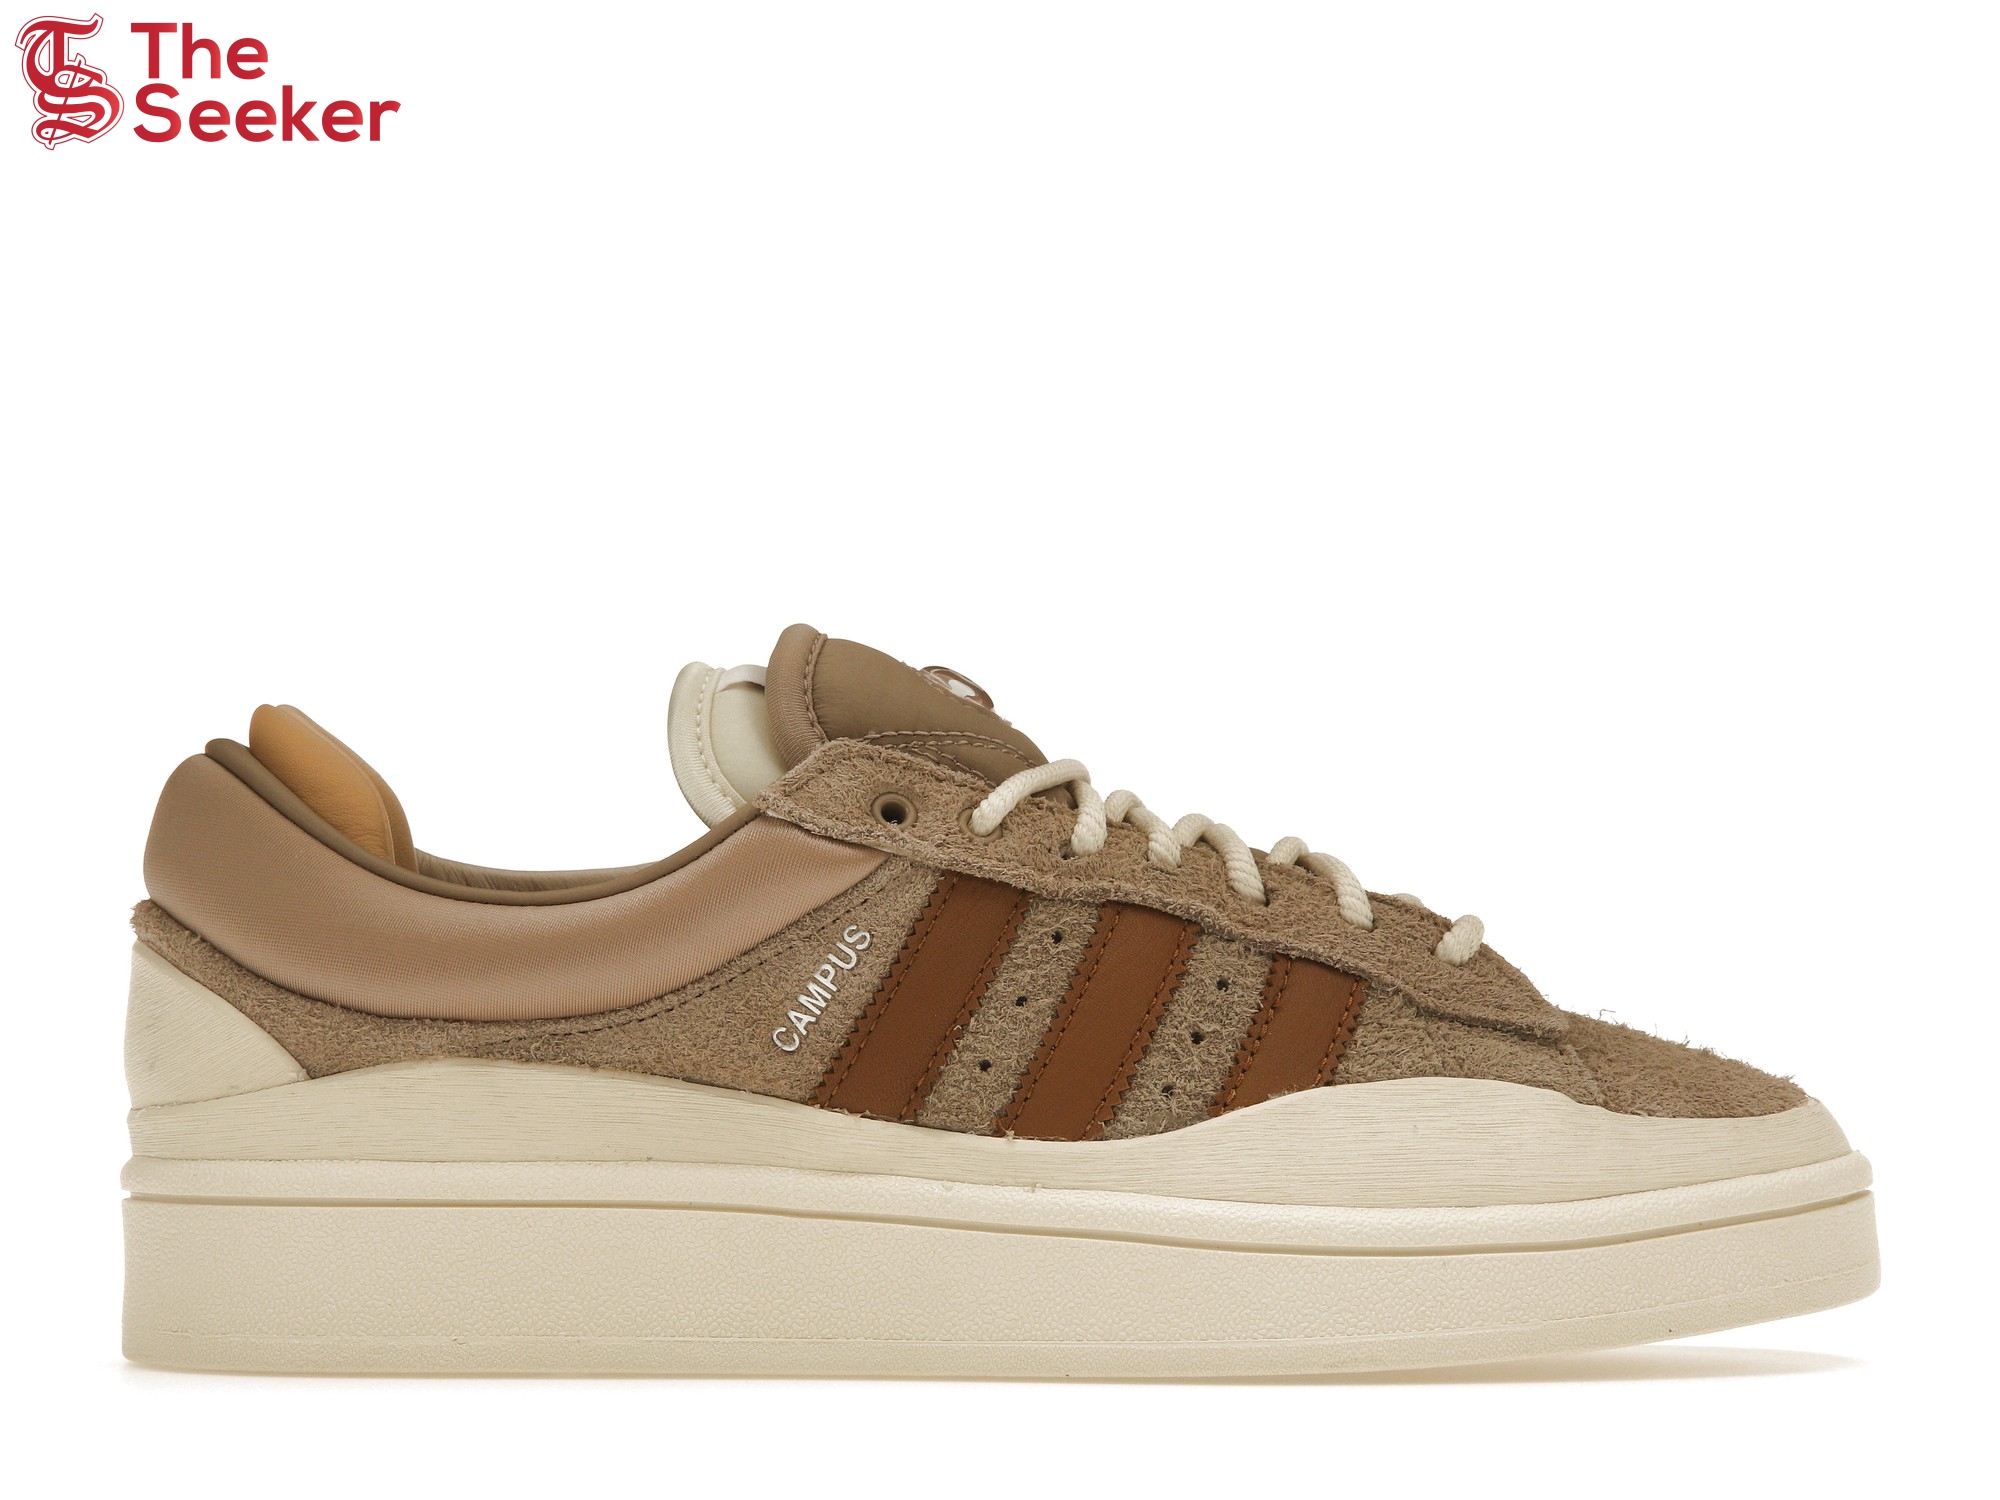 adidas Campus Light Bad Bunny Chalky Brown